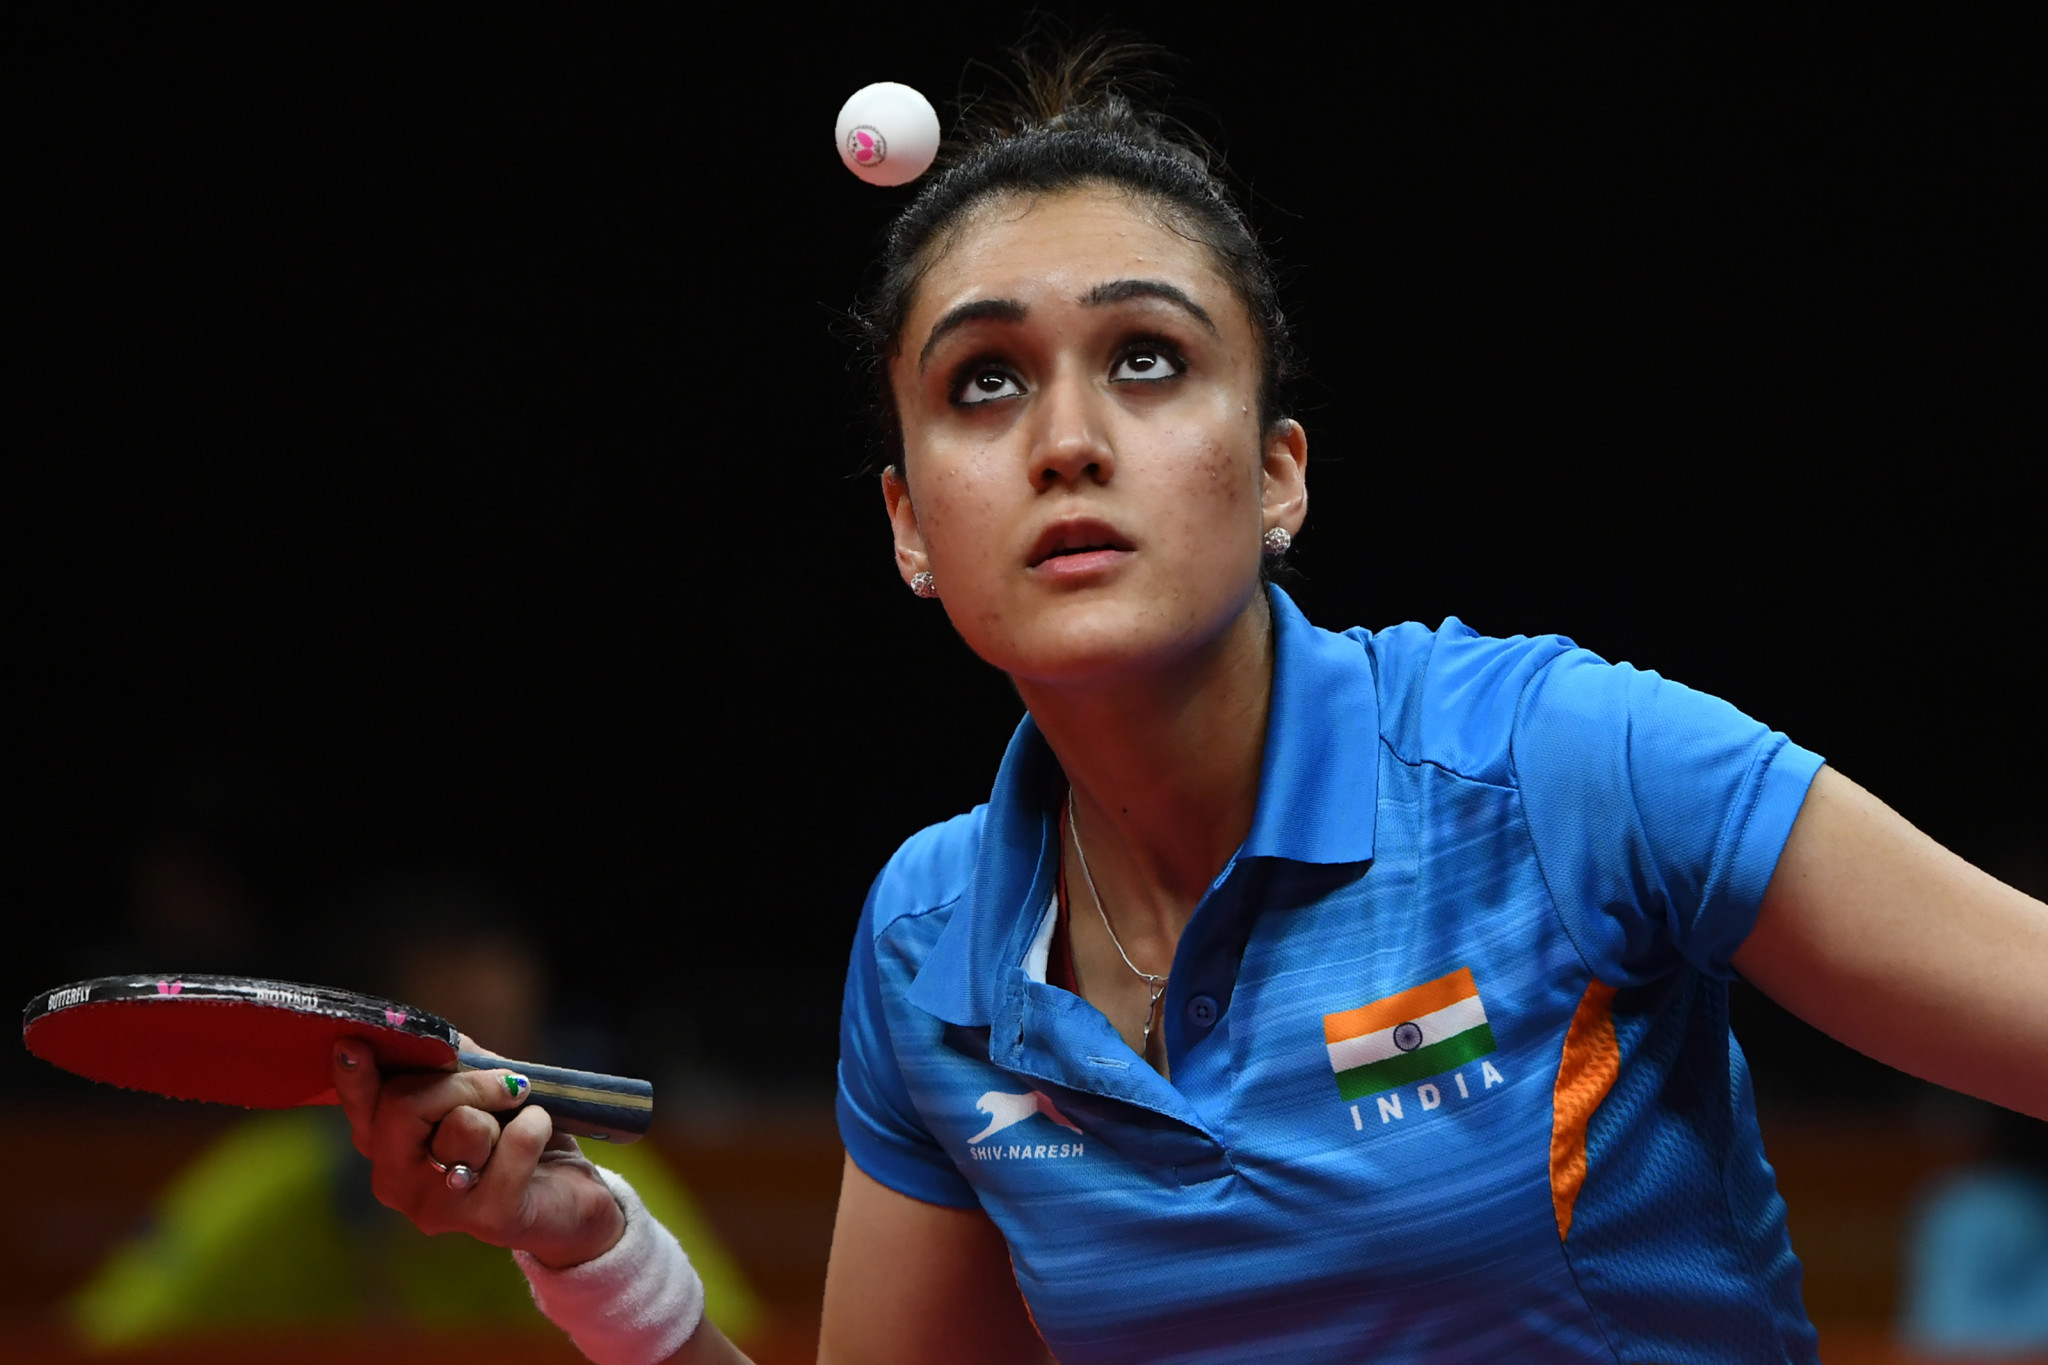 India's Manika Batra produced a dominant performance on her way to winning the women's singles table tennis event ©Getty Images